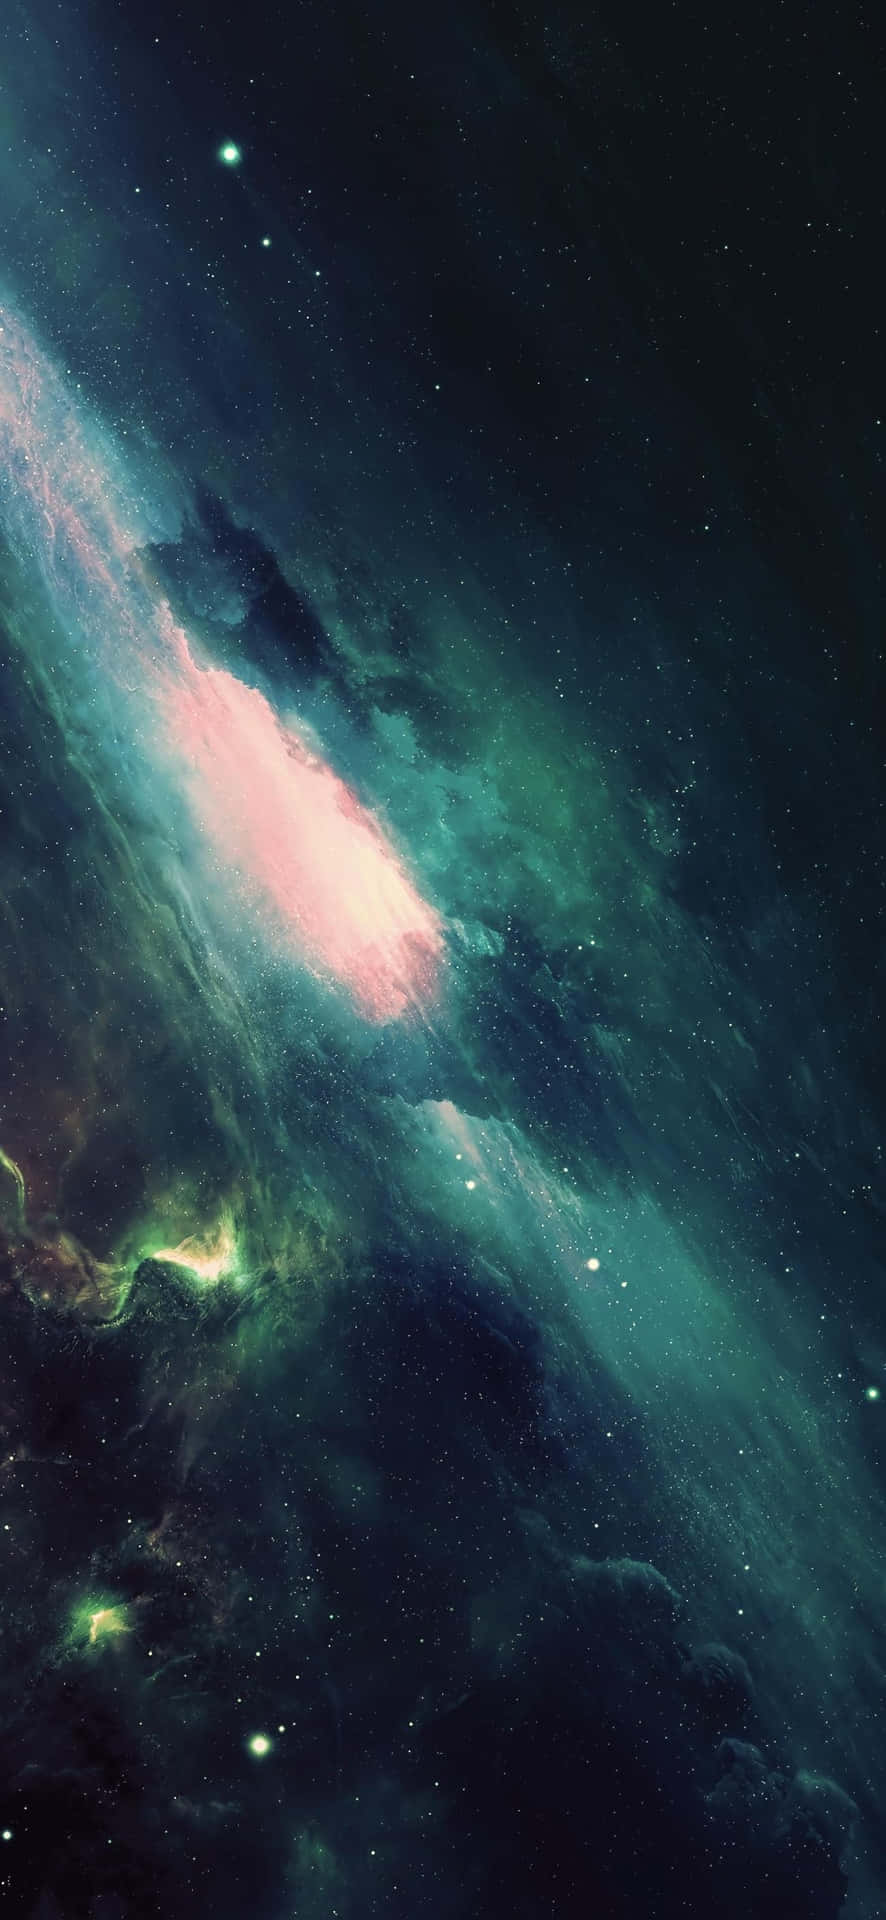 Explore the Depths of Space with this Mysterious Green and Blue Galaxy Wallpaper